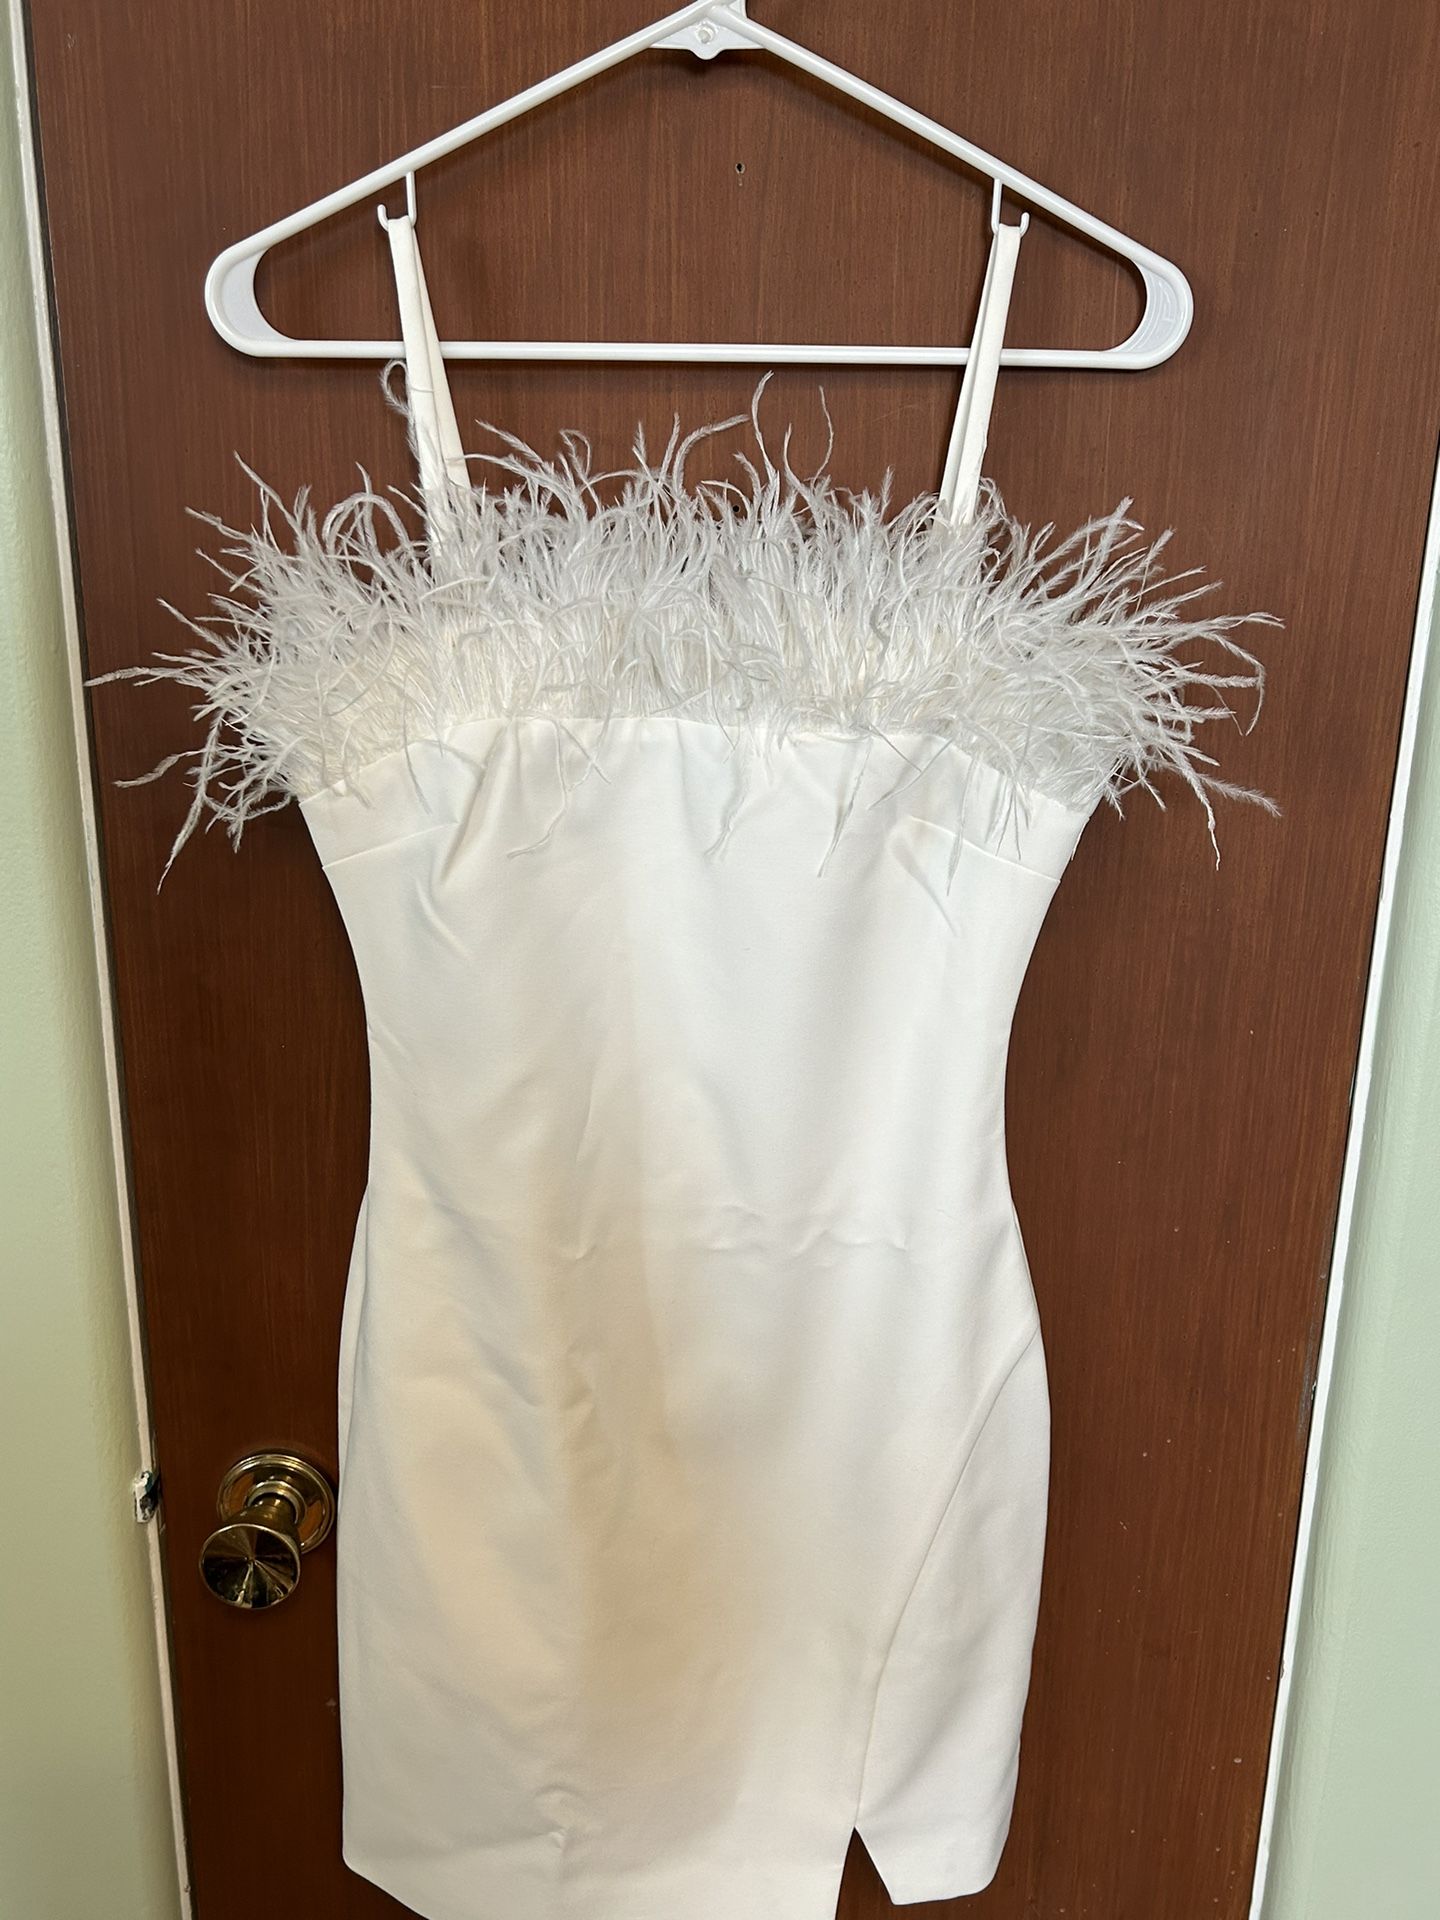 LIKELY Designer Dress White With real Ostrich Feathers NWT Size 2